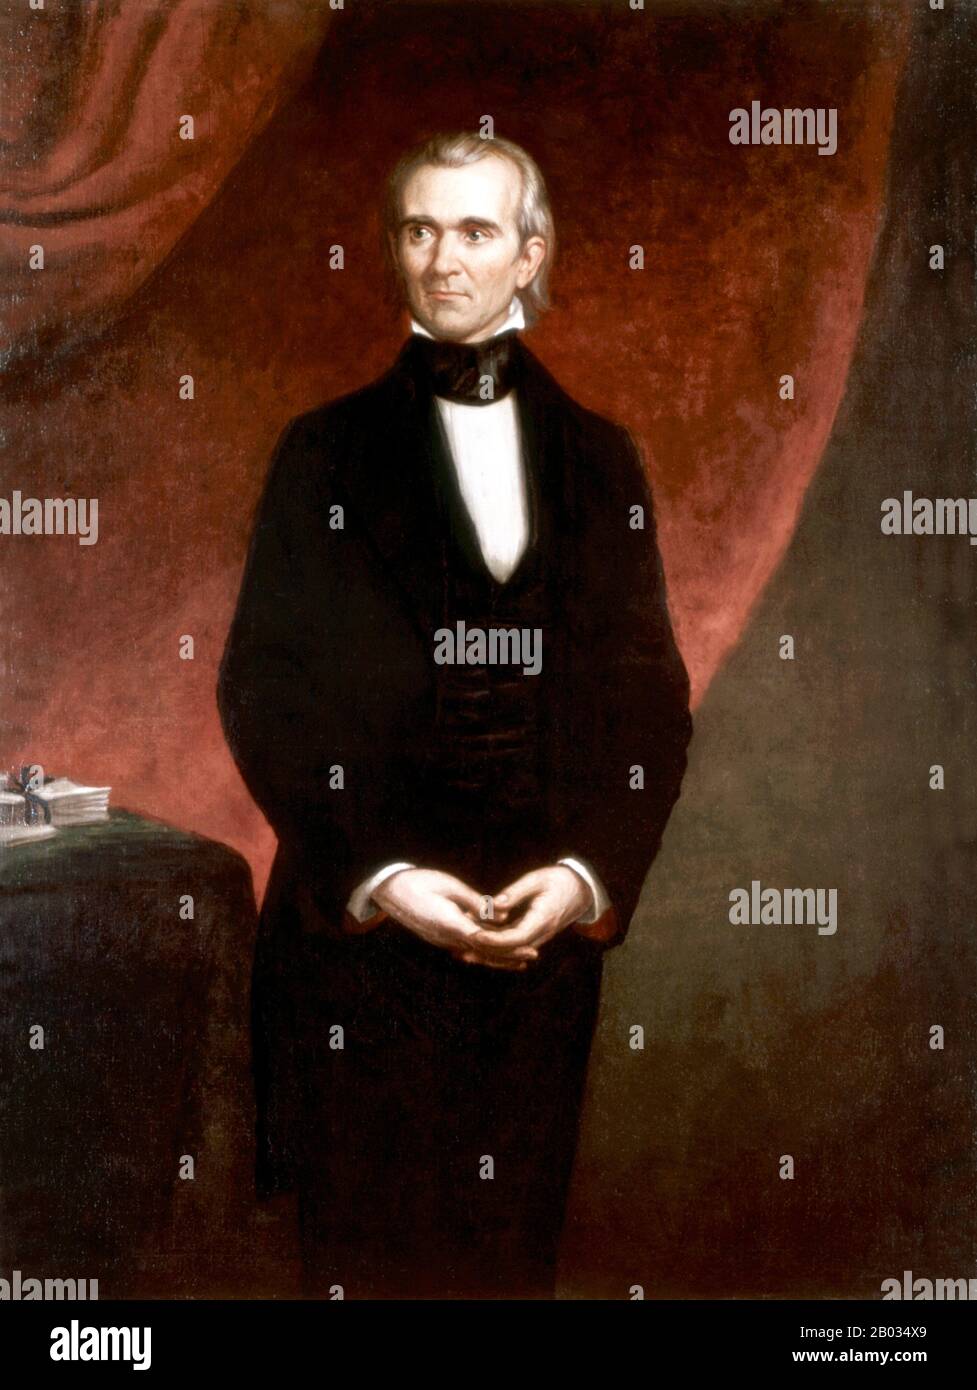 James Knox Polk (November 2, 1795 – June 15, 1849) was the 11th President of the United States (1845–49). Polk was born in Mecklenburg County, North Carolina. He later lived in and represented Tennessee. A Democrat, Polk served as the 13th Speaker of the House of Representatives (1835–39)—the only president to have served as House Speaker—and Governor of Tennessee (1839–41).  Polk was the surprise (dark horse) candidate for president in 1844, defeating Henry Clay of the rival Whig Party by promising to annex the Republic of Texas. Polk was a leader of Jacksonian Democracy during the Second Par Stock Photo